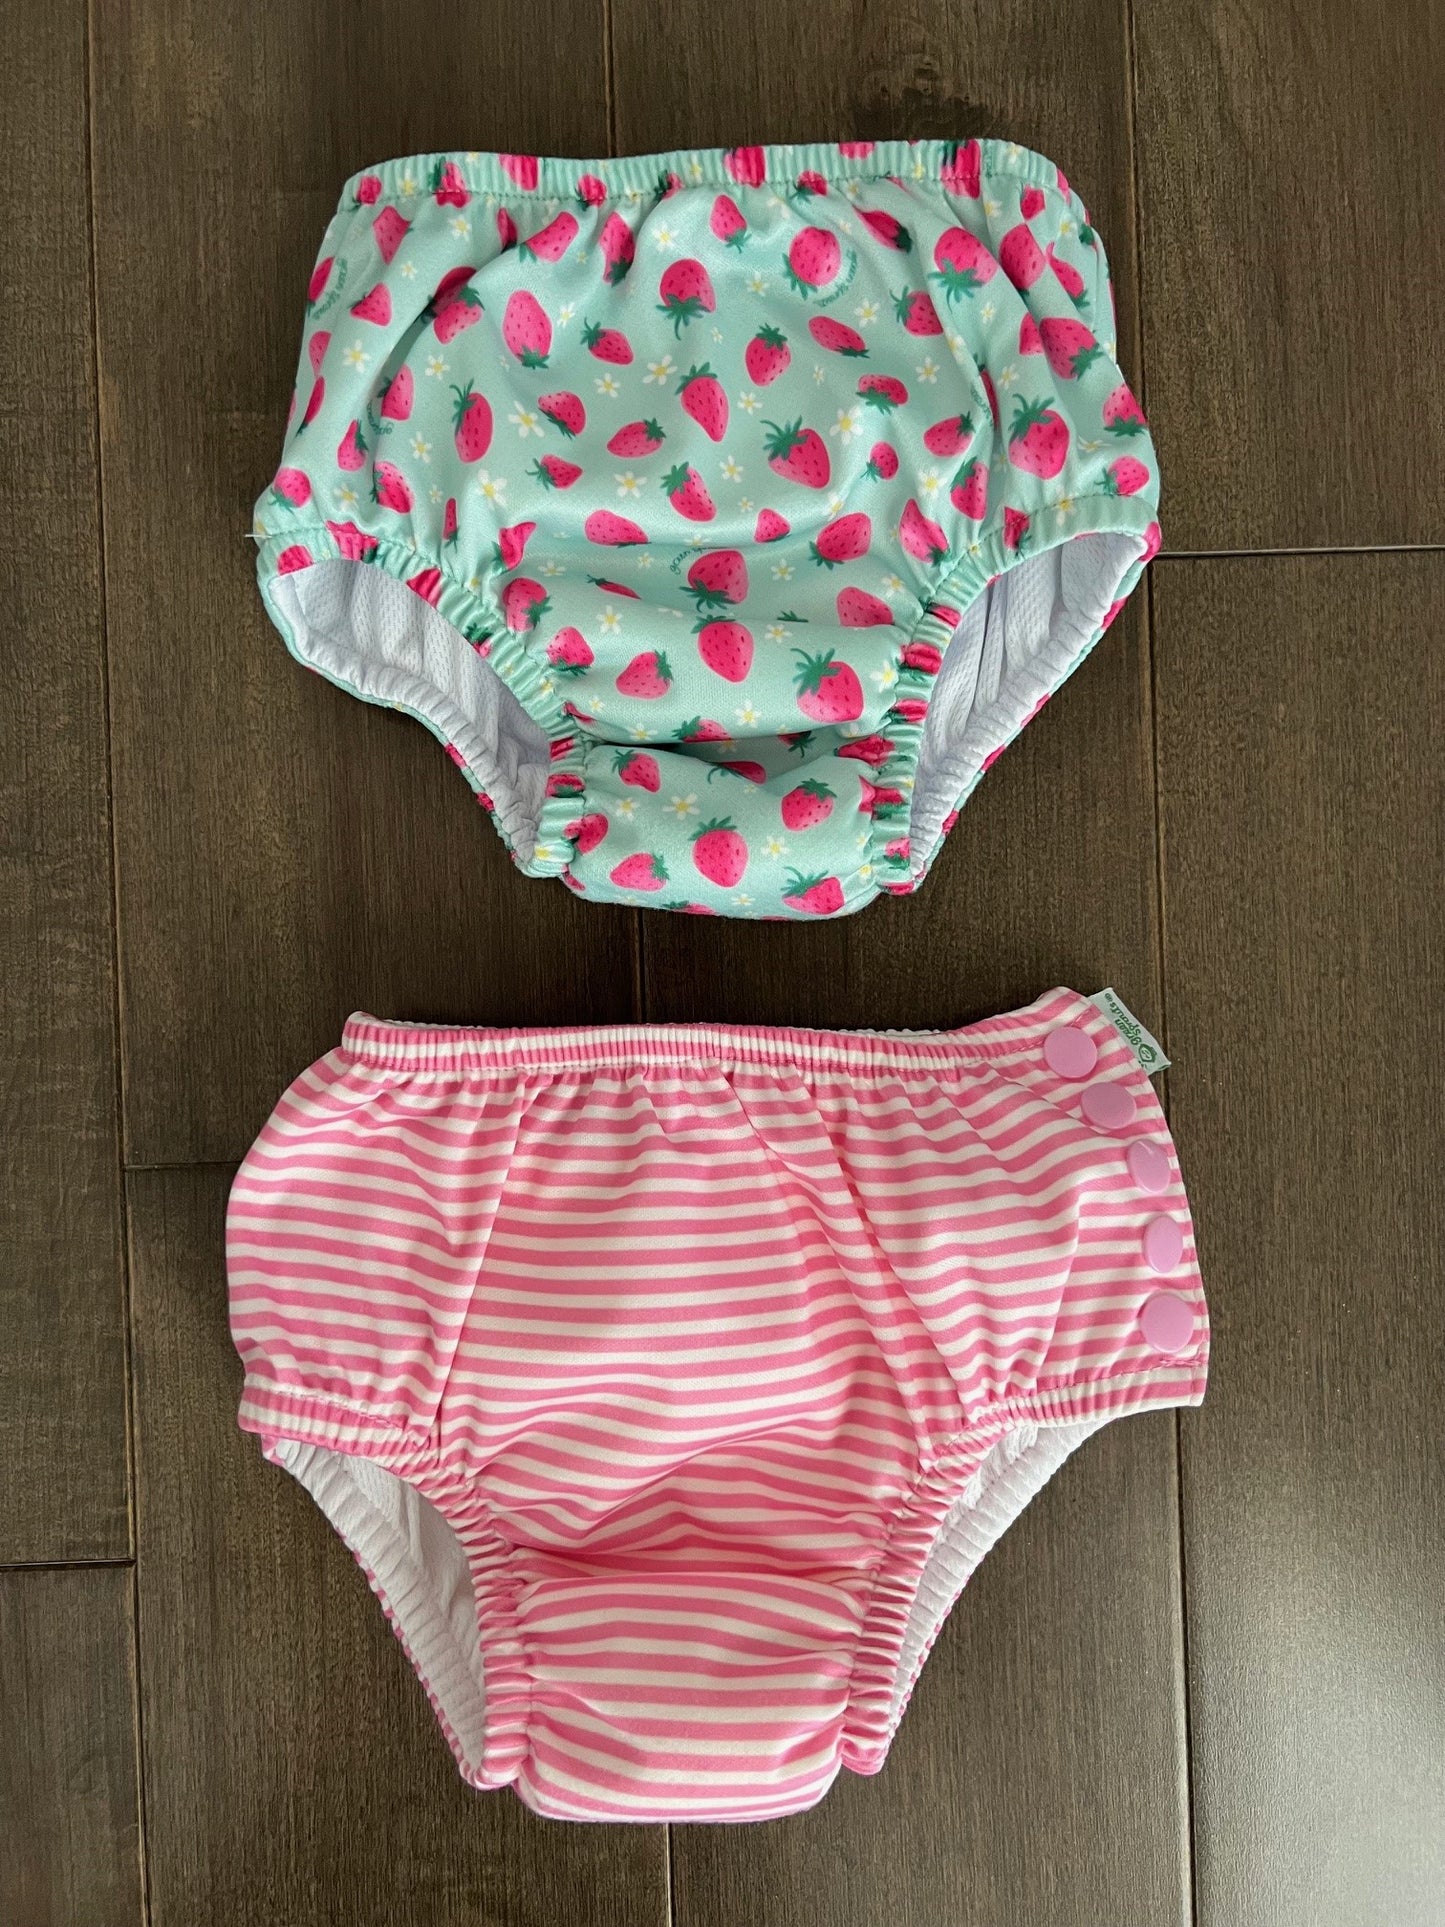 green sprouts swim diaper bundle (2 total), (24 months)